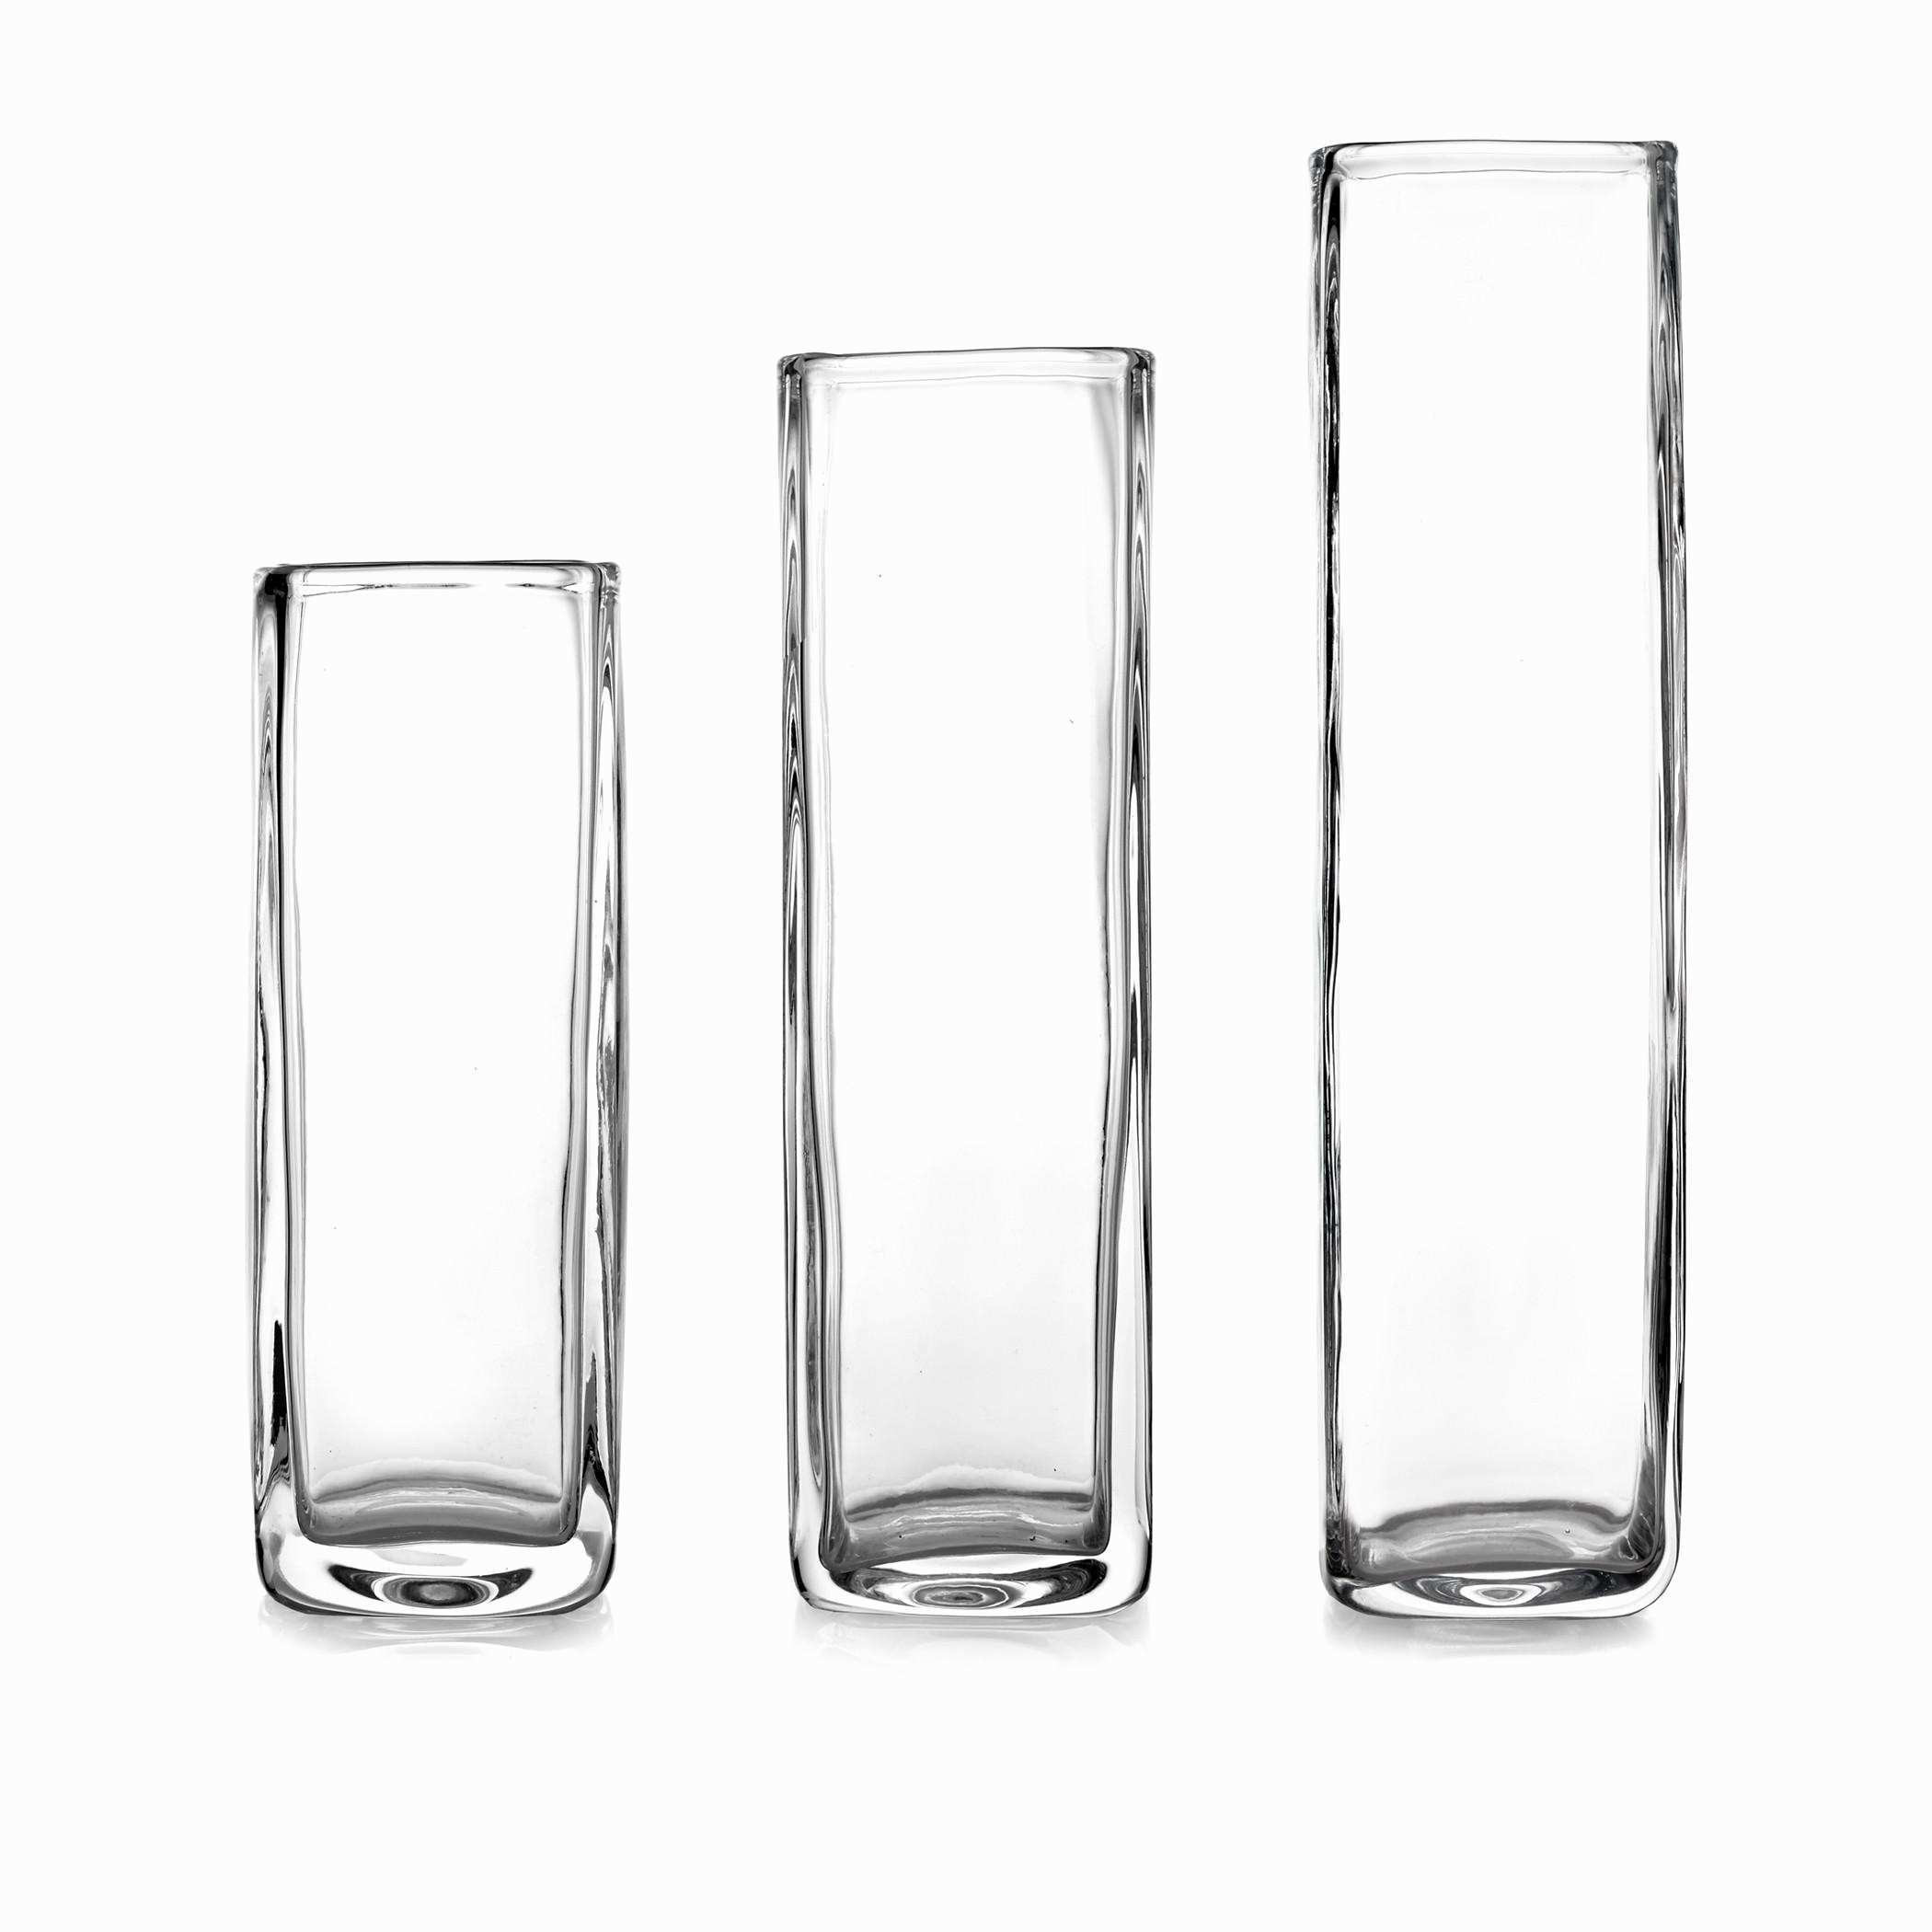 26 Stylish Irish Crystal Vase 2024 free download irish crystal vase of tall black vases pictures il fullxfull h vases black vase white throughout tall black vases gallery glass wedding centerpieces inspirational living room tall glass of t